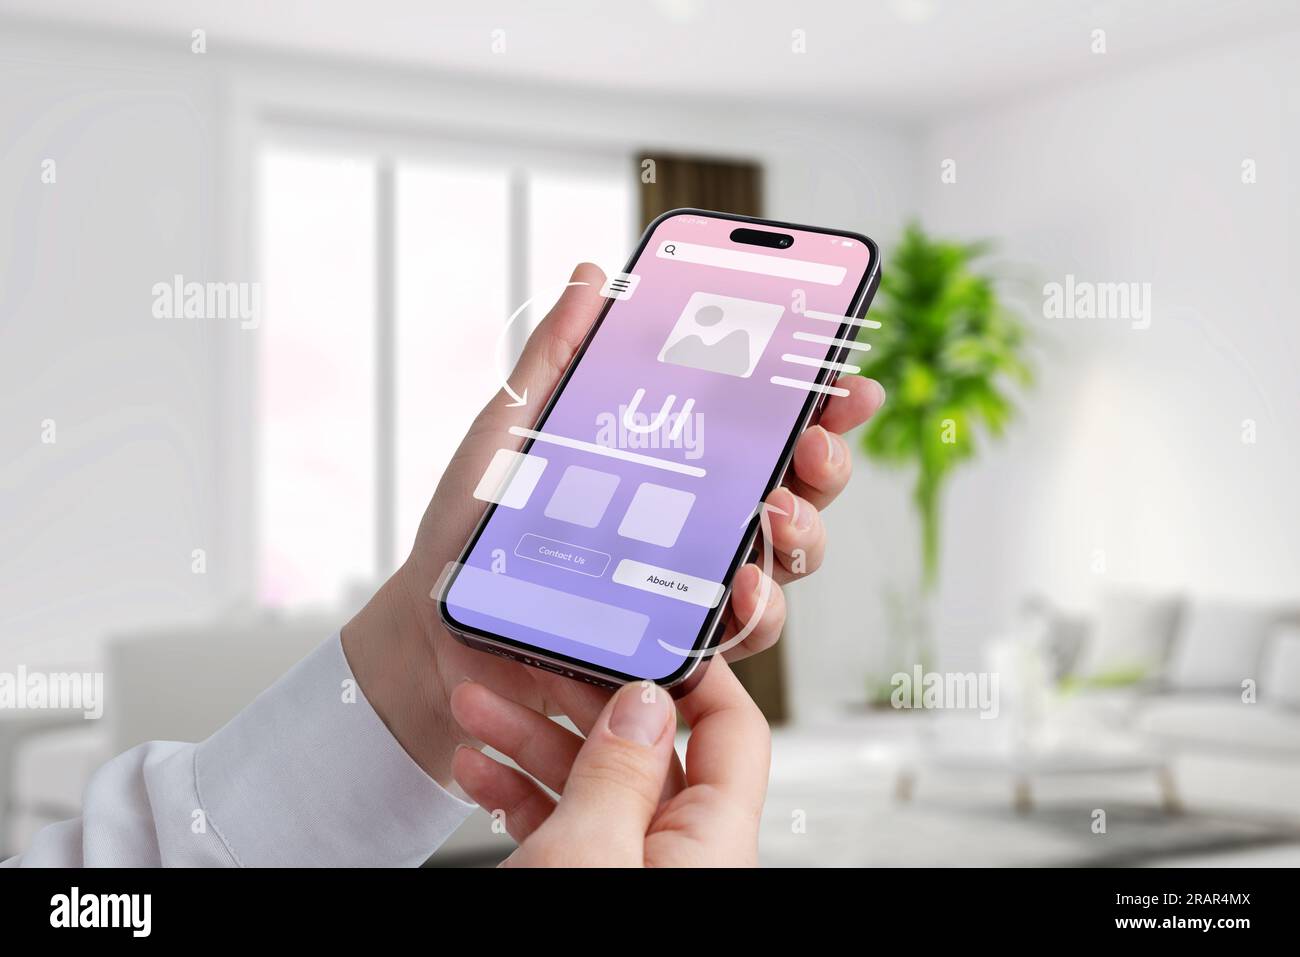 Concept of using a mobile app. Complicated or simple user interface. App elements fly over mobile phone display Stock Photo